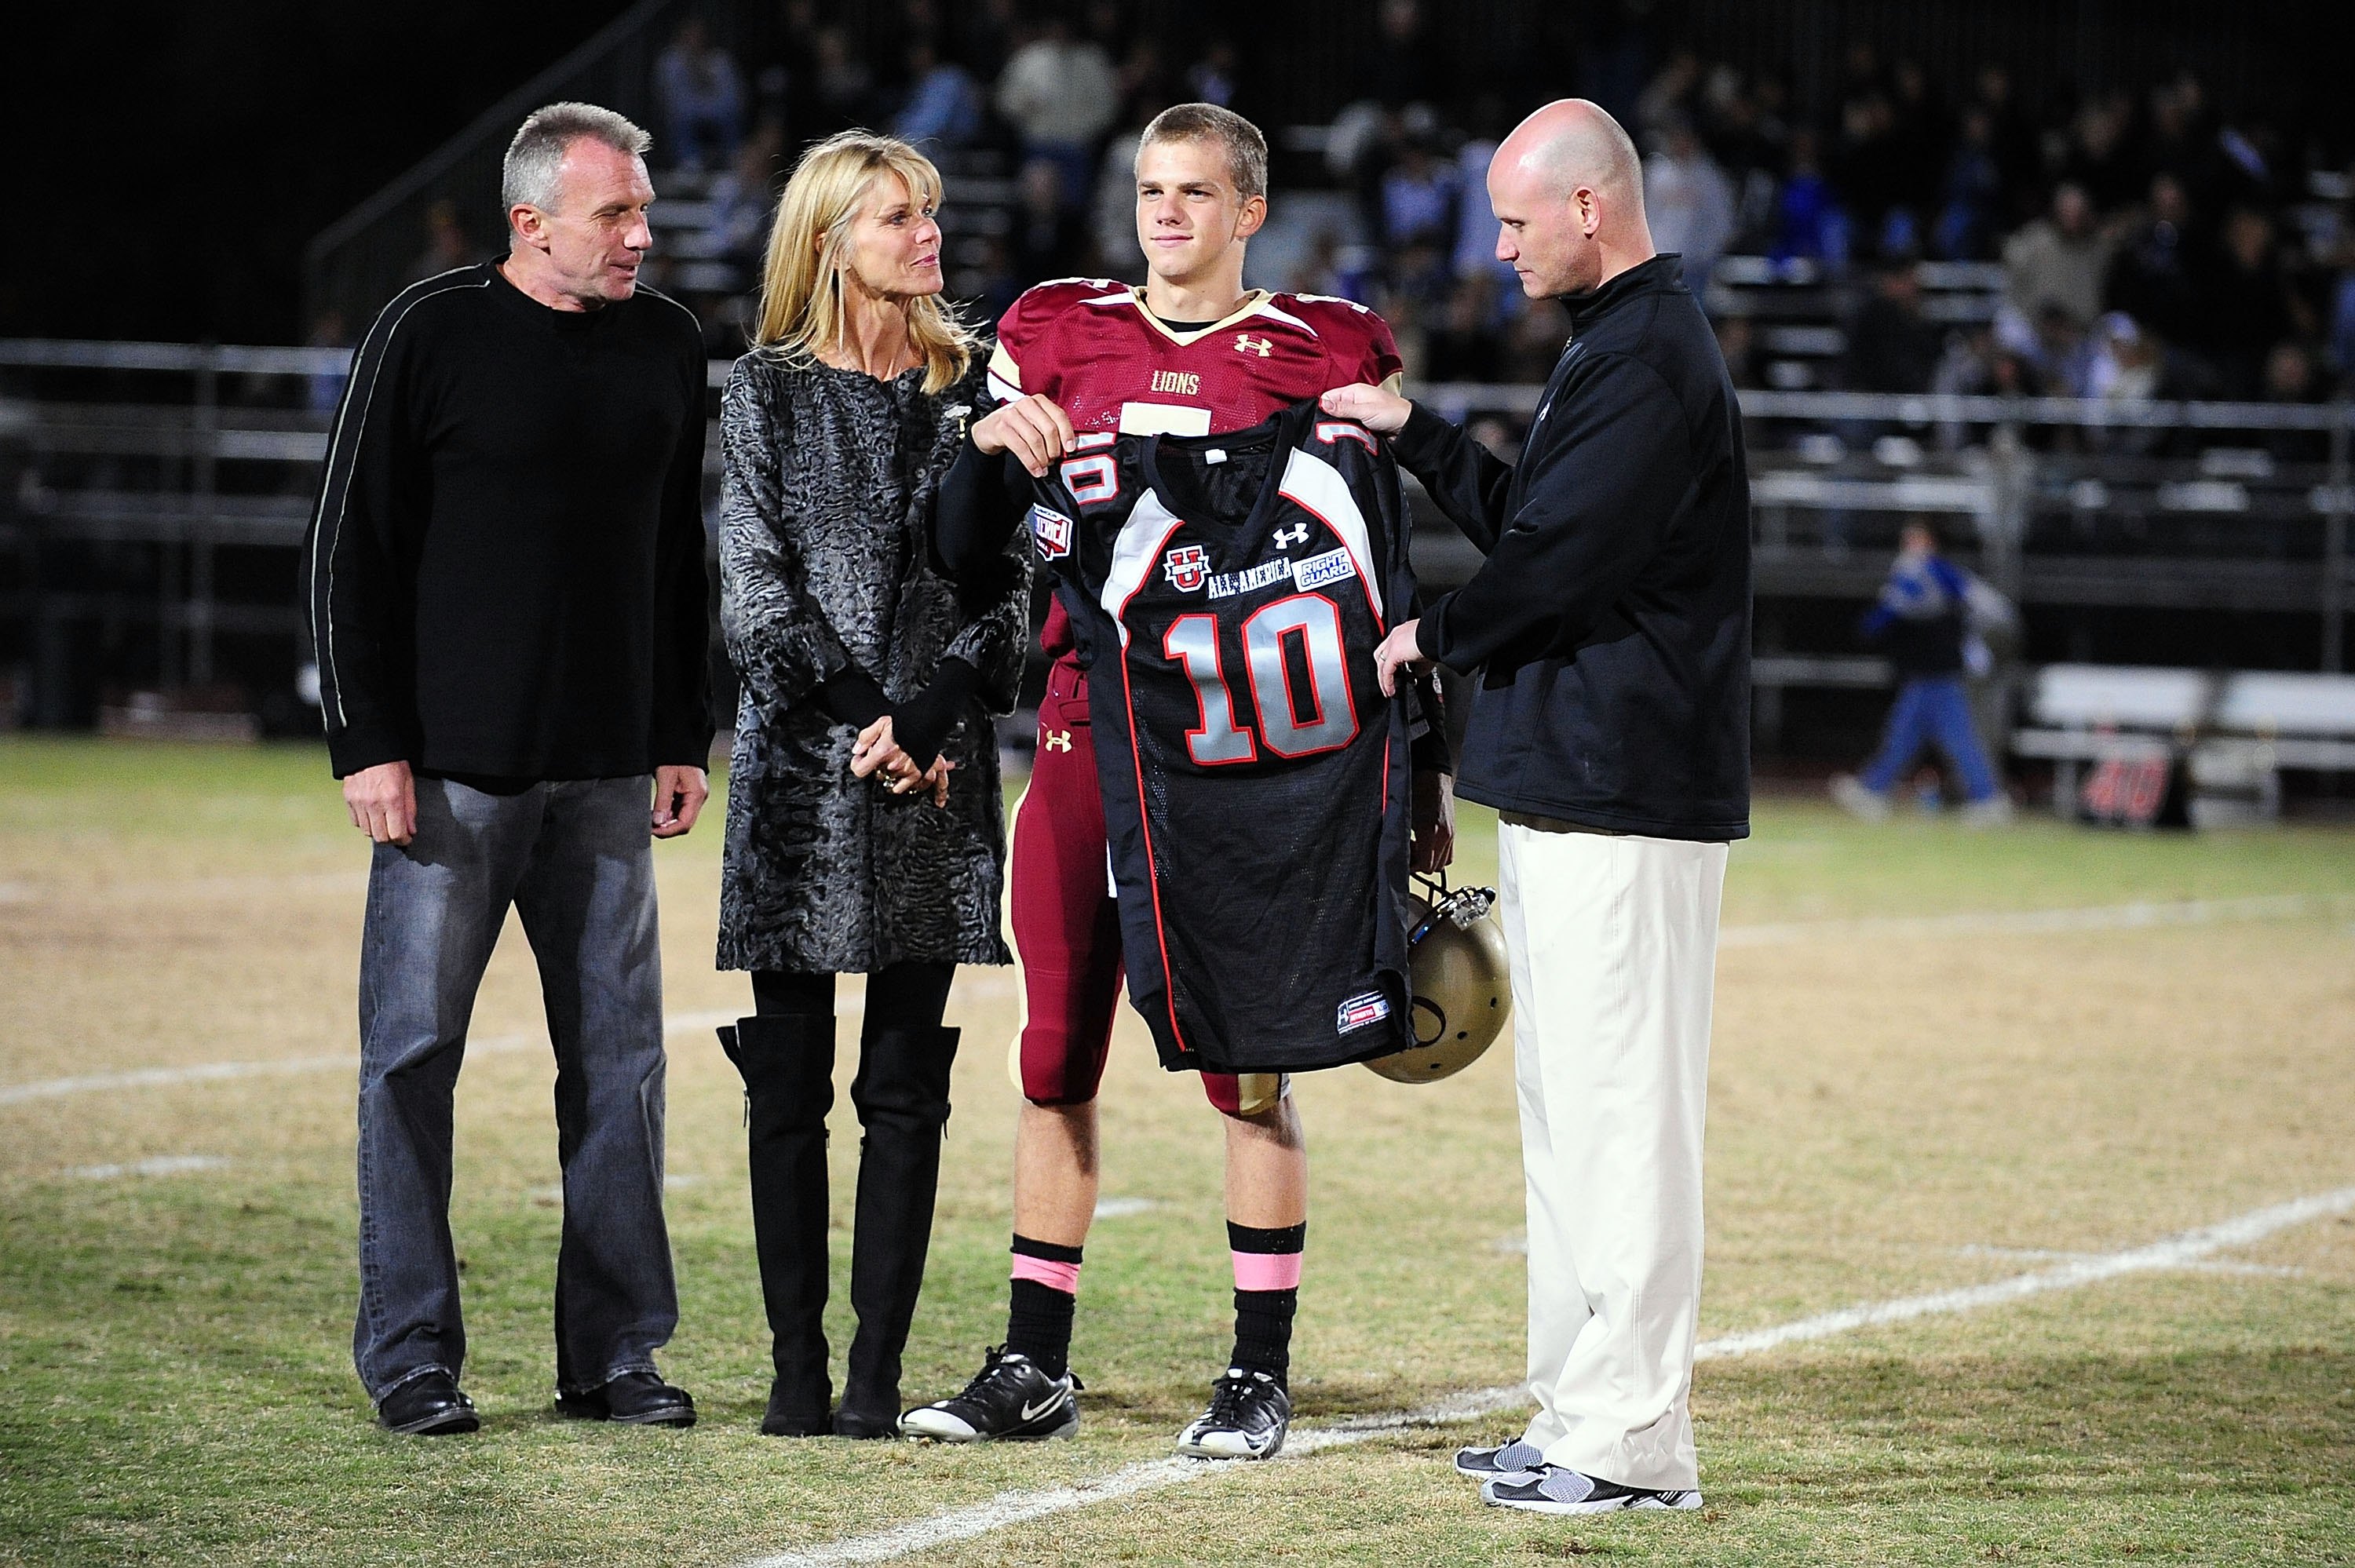 WESTLAKE VILLAGE, CA - OCTOBER 30: (L-R) Joe Montana, Jennifer Montana and Nick Montana #10 stand for a celebration picture during halftime of the game against Oak Park on October 30, 2009 in Westlake Village, California.  (Photo by Jacob de Golish/Getty